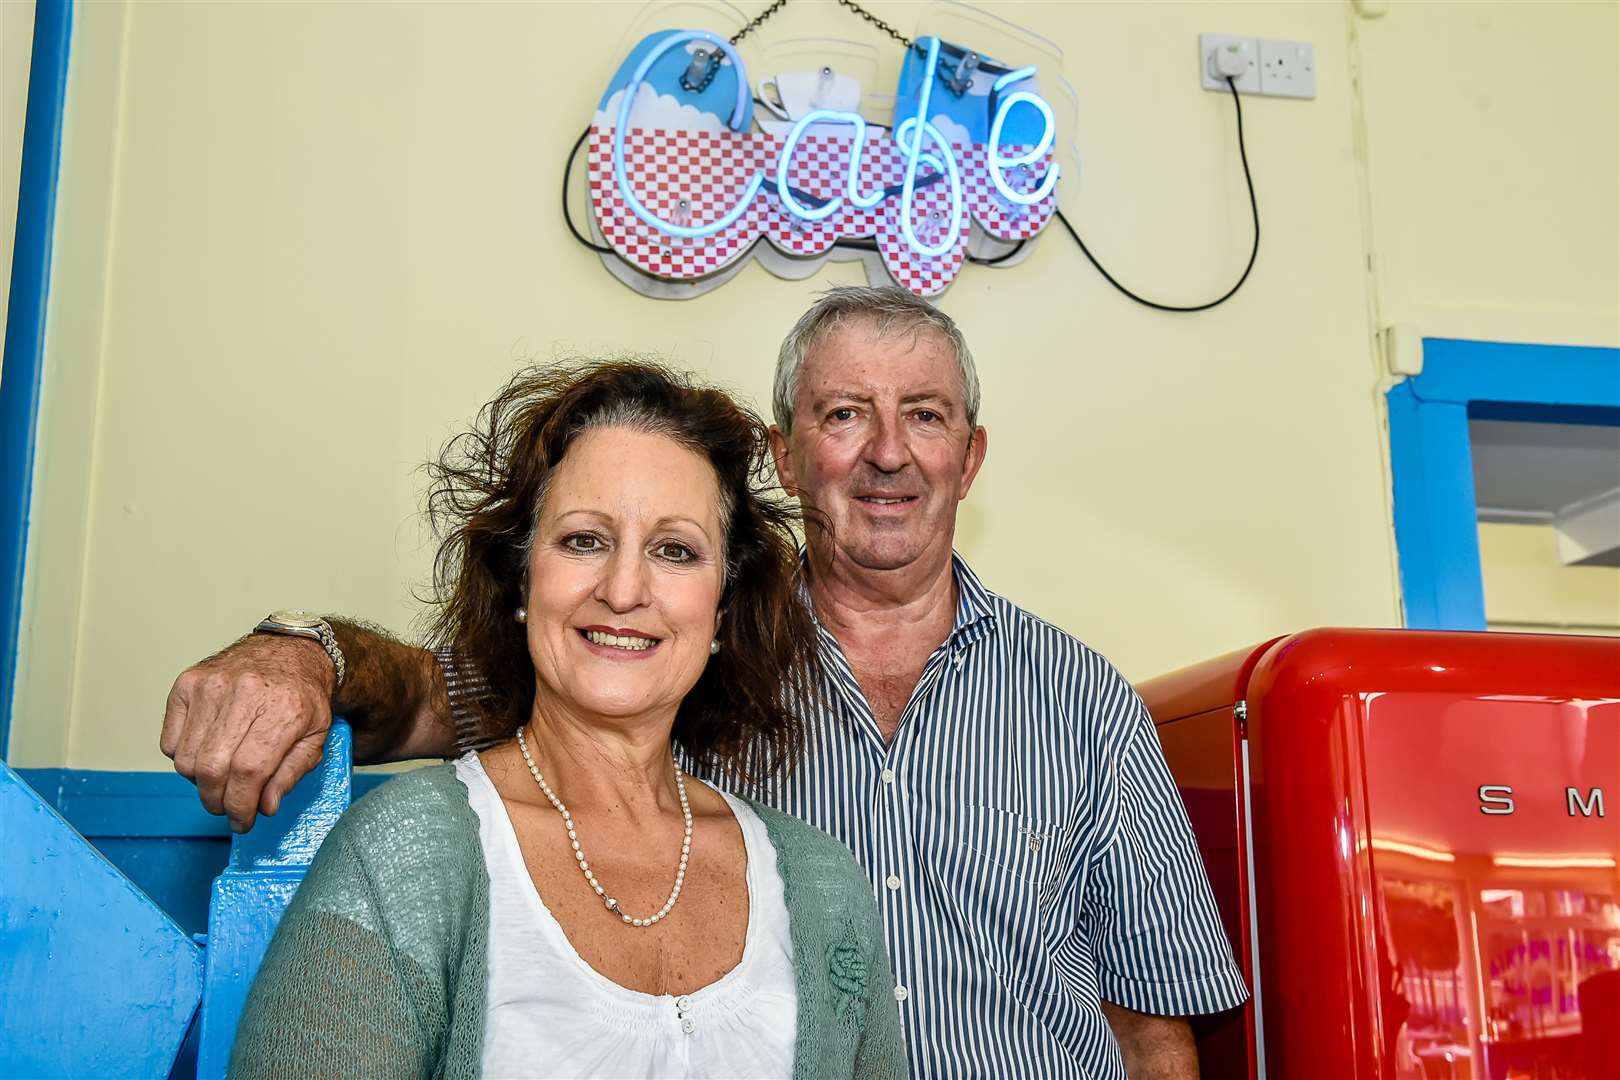 Patrick and Julie Breen have managed to get the cafe open again within a month